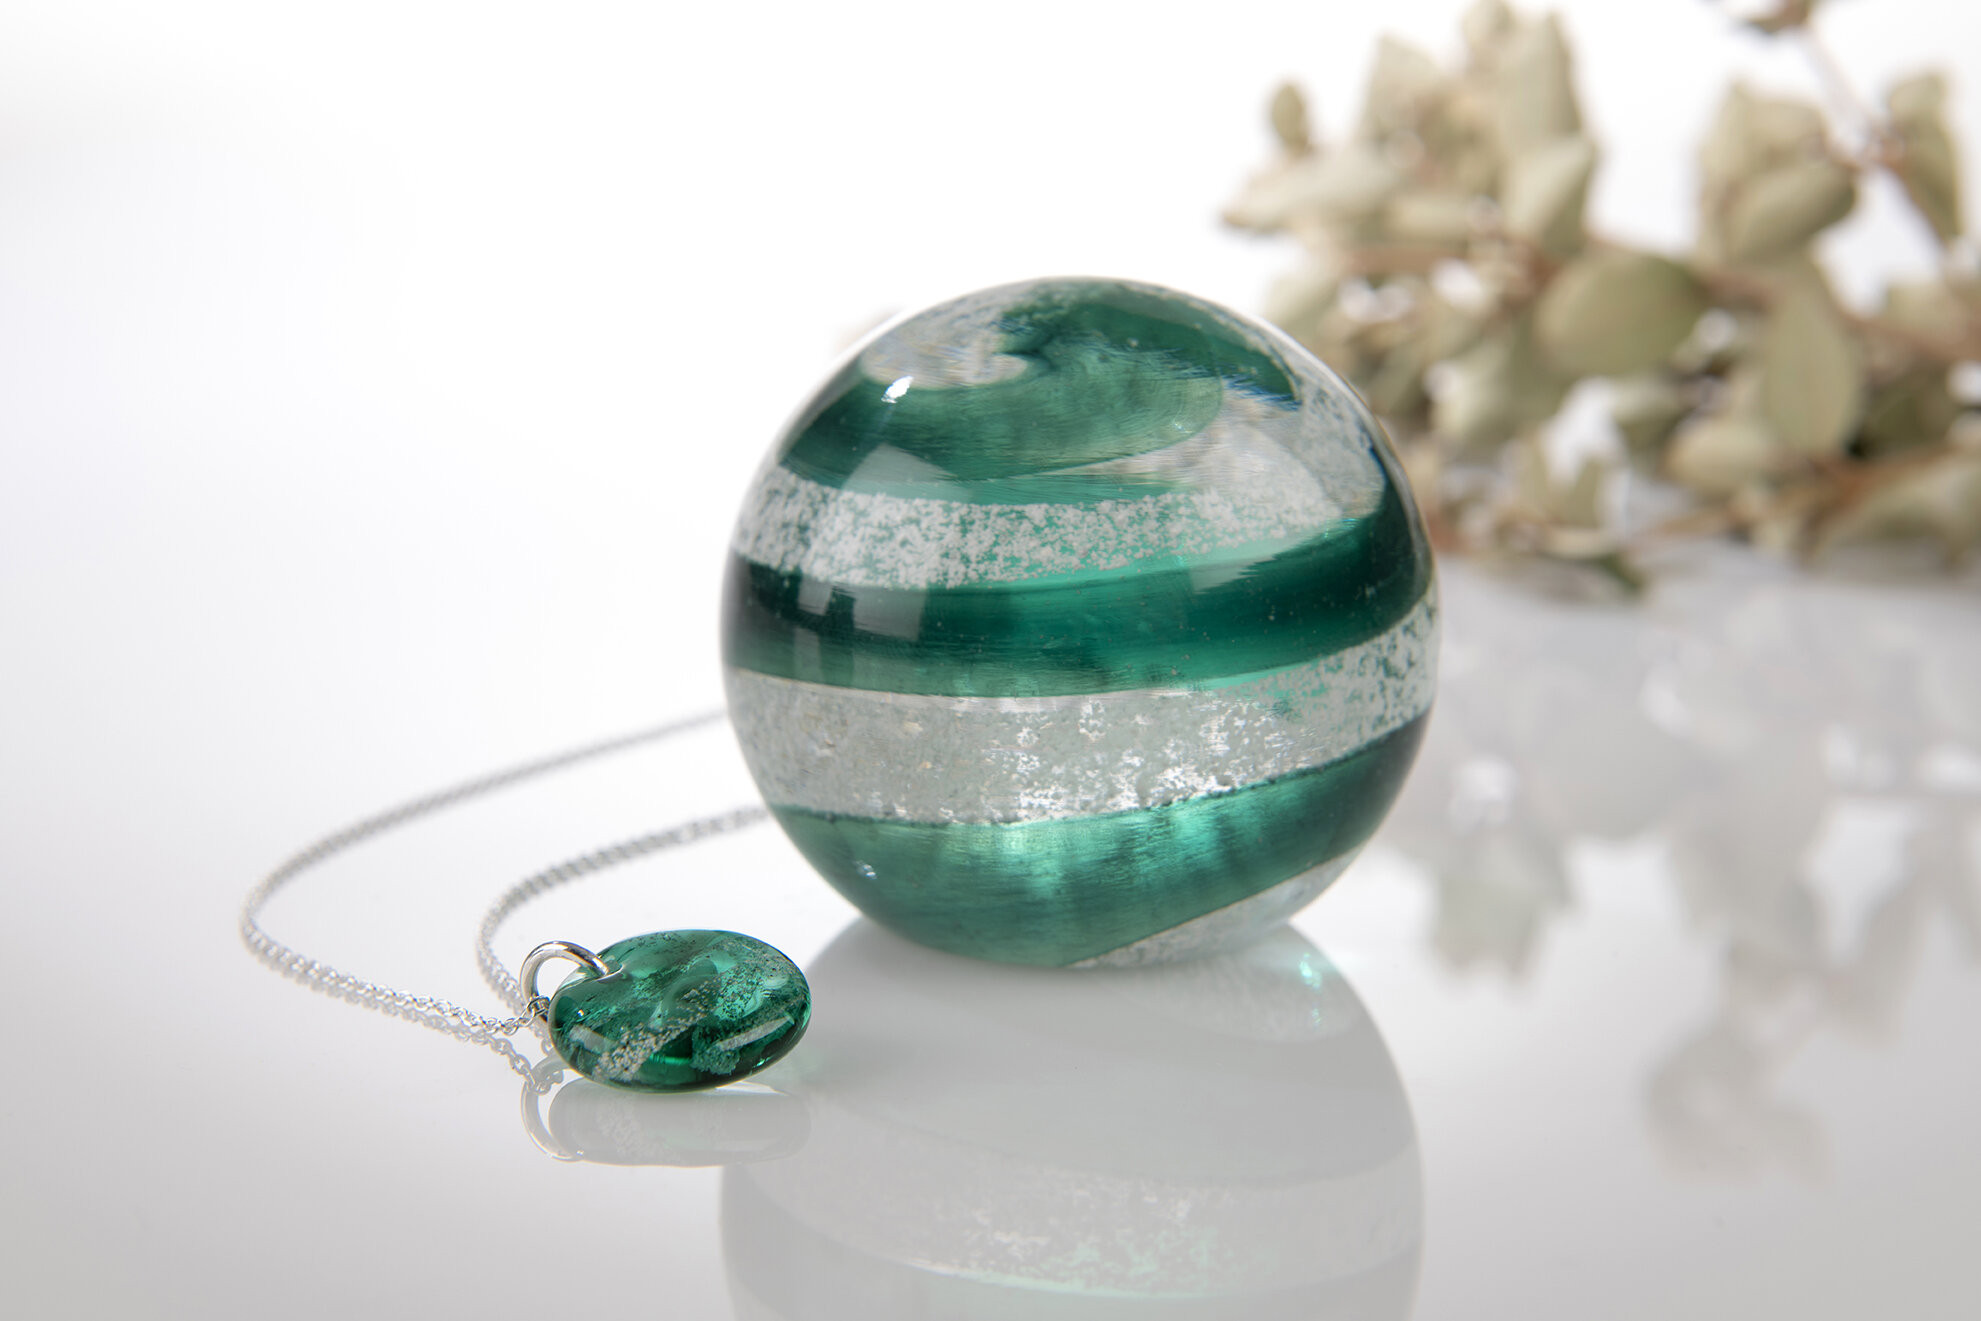   Eternity spheres and pendants   Remember your loved ones in an everlasting way 